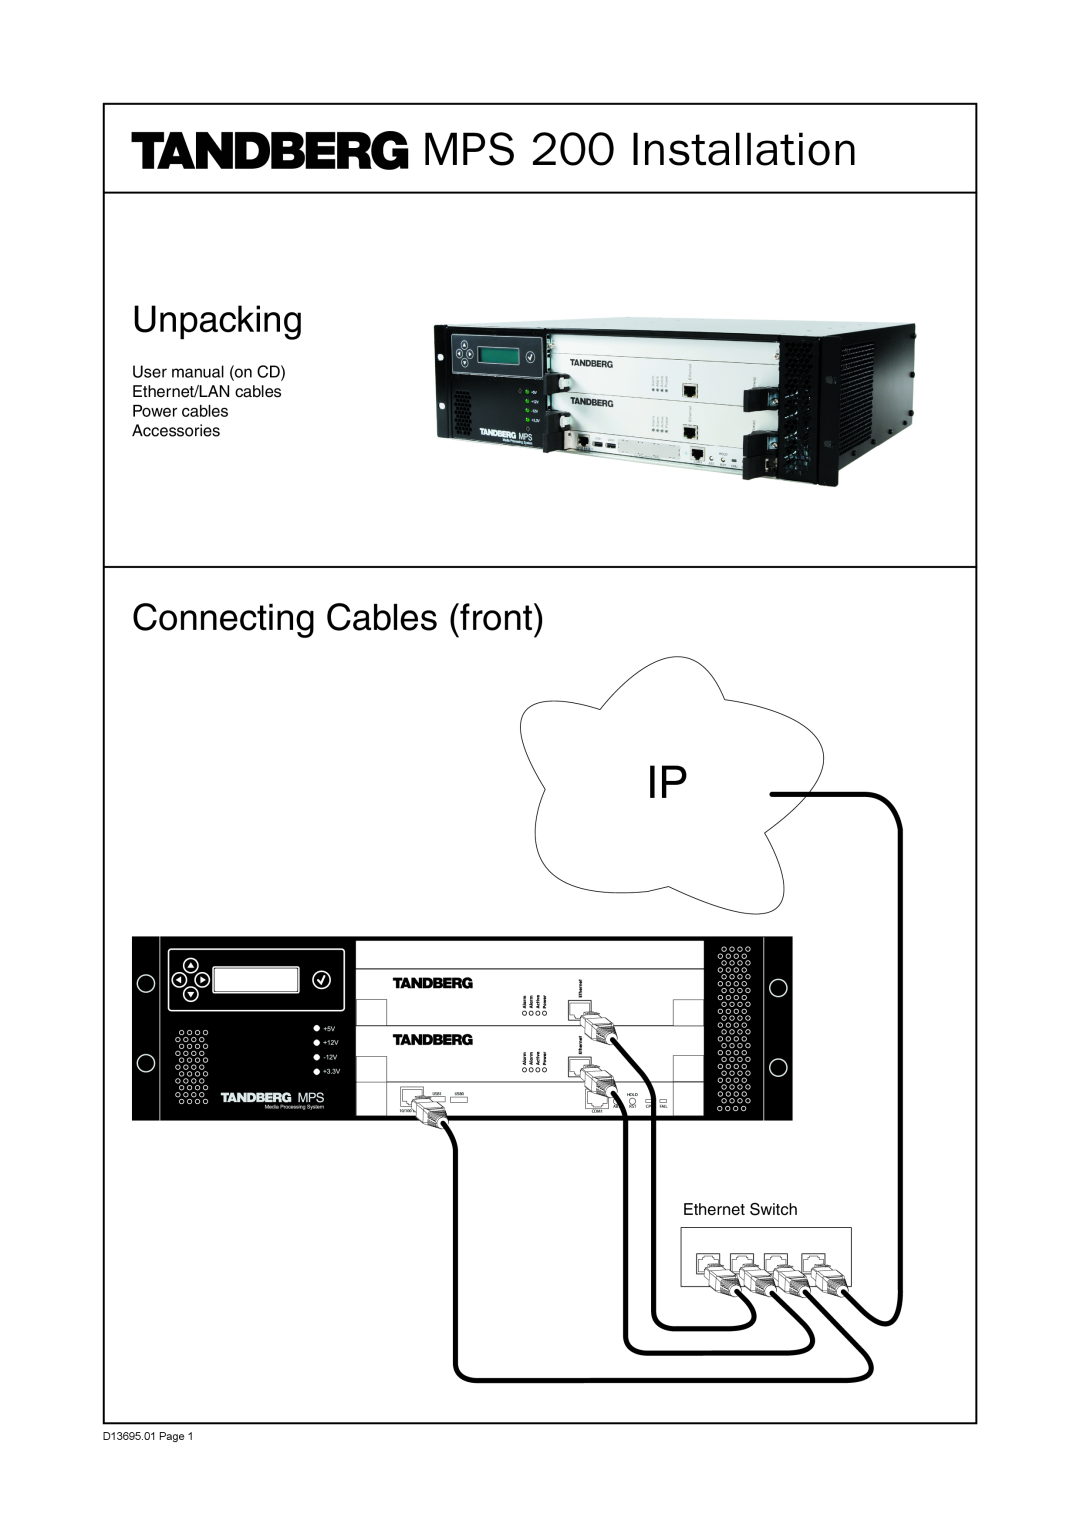 TANDBERG user manual Unpacking, Connecting Cables front, MPS 200 Installation, D13695.01 Page, USB1, USB0, Hold, 10/100 